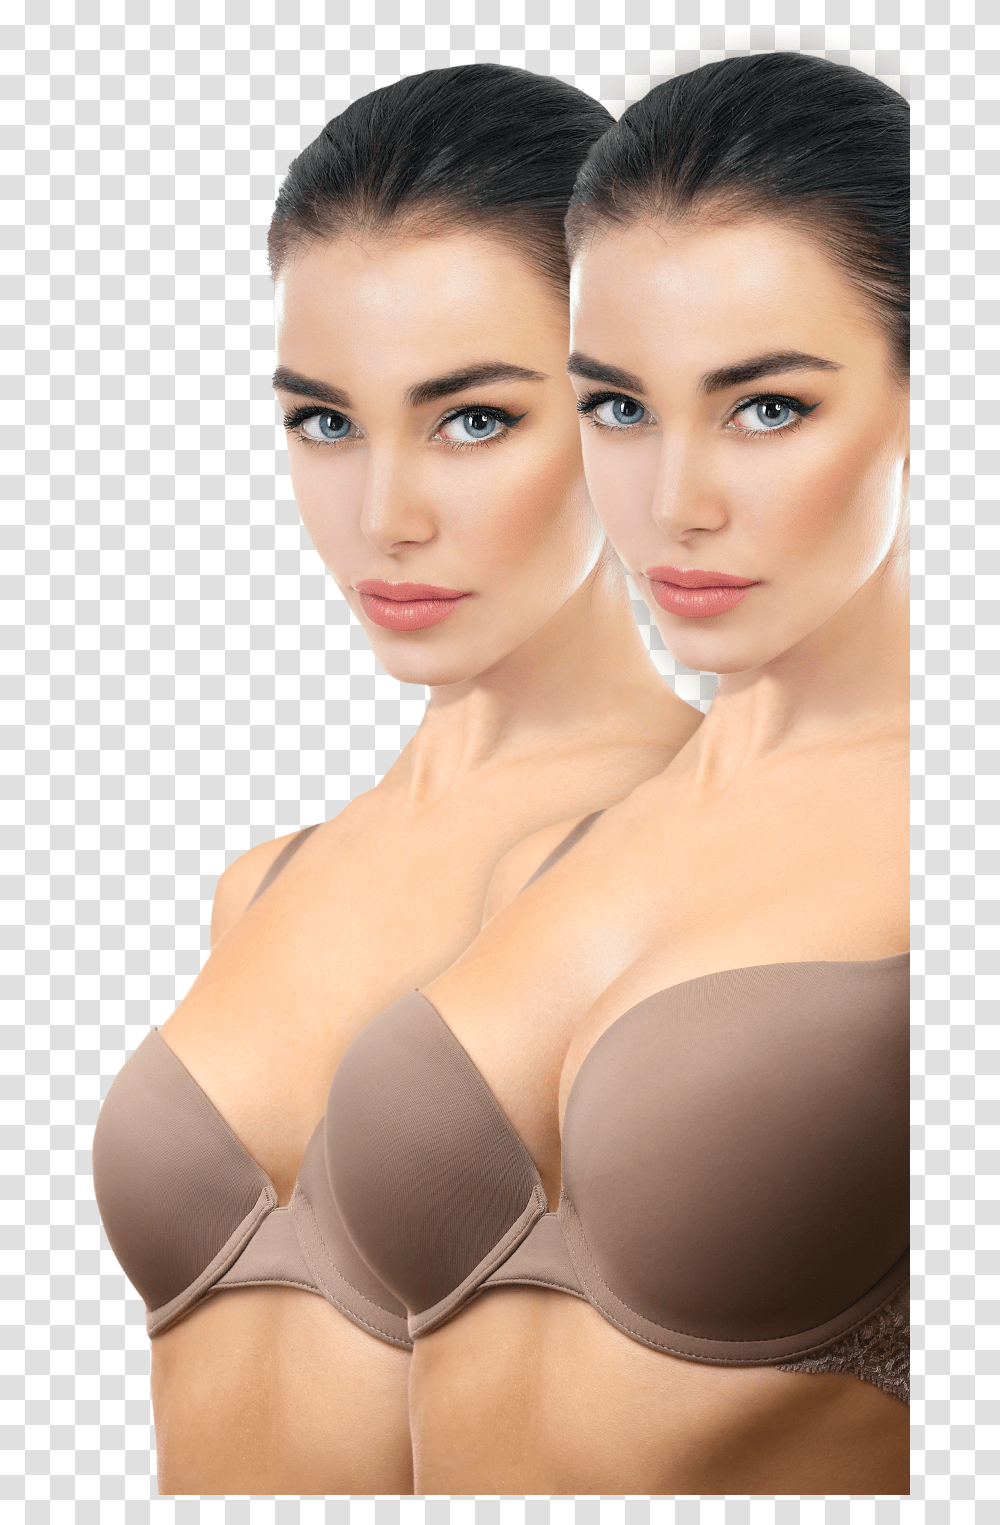 Before And After Breast Augmentation Brassiere, Apparel, Underwear, Lingerie Transparent Png